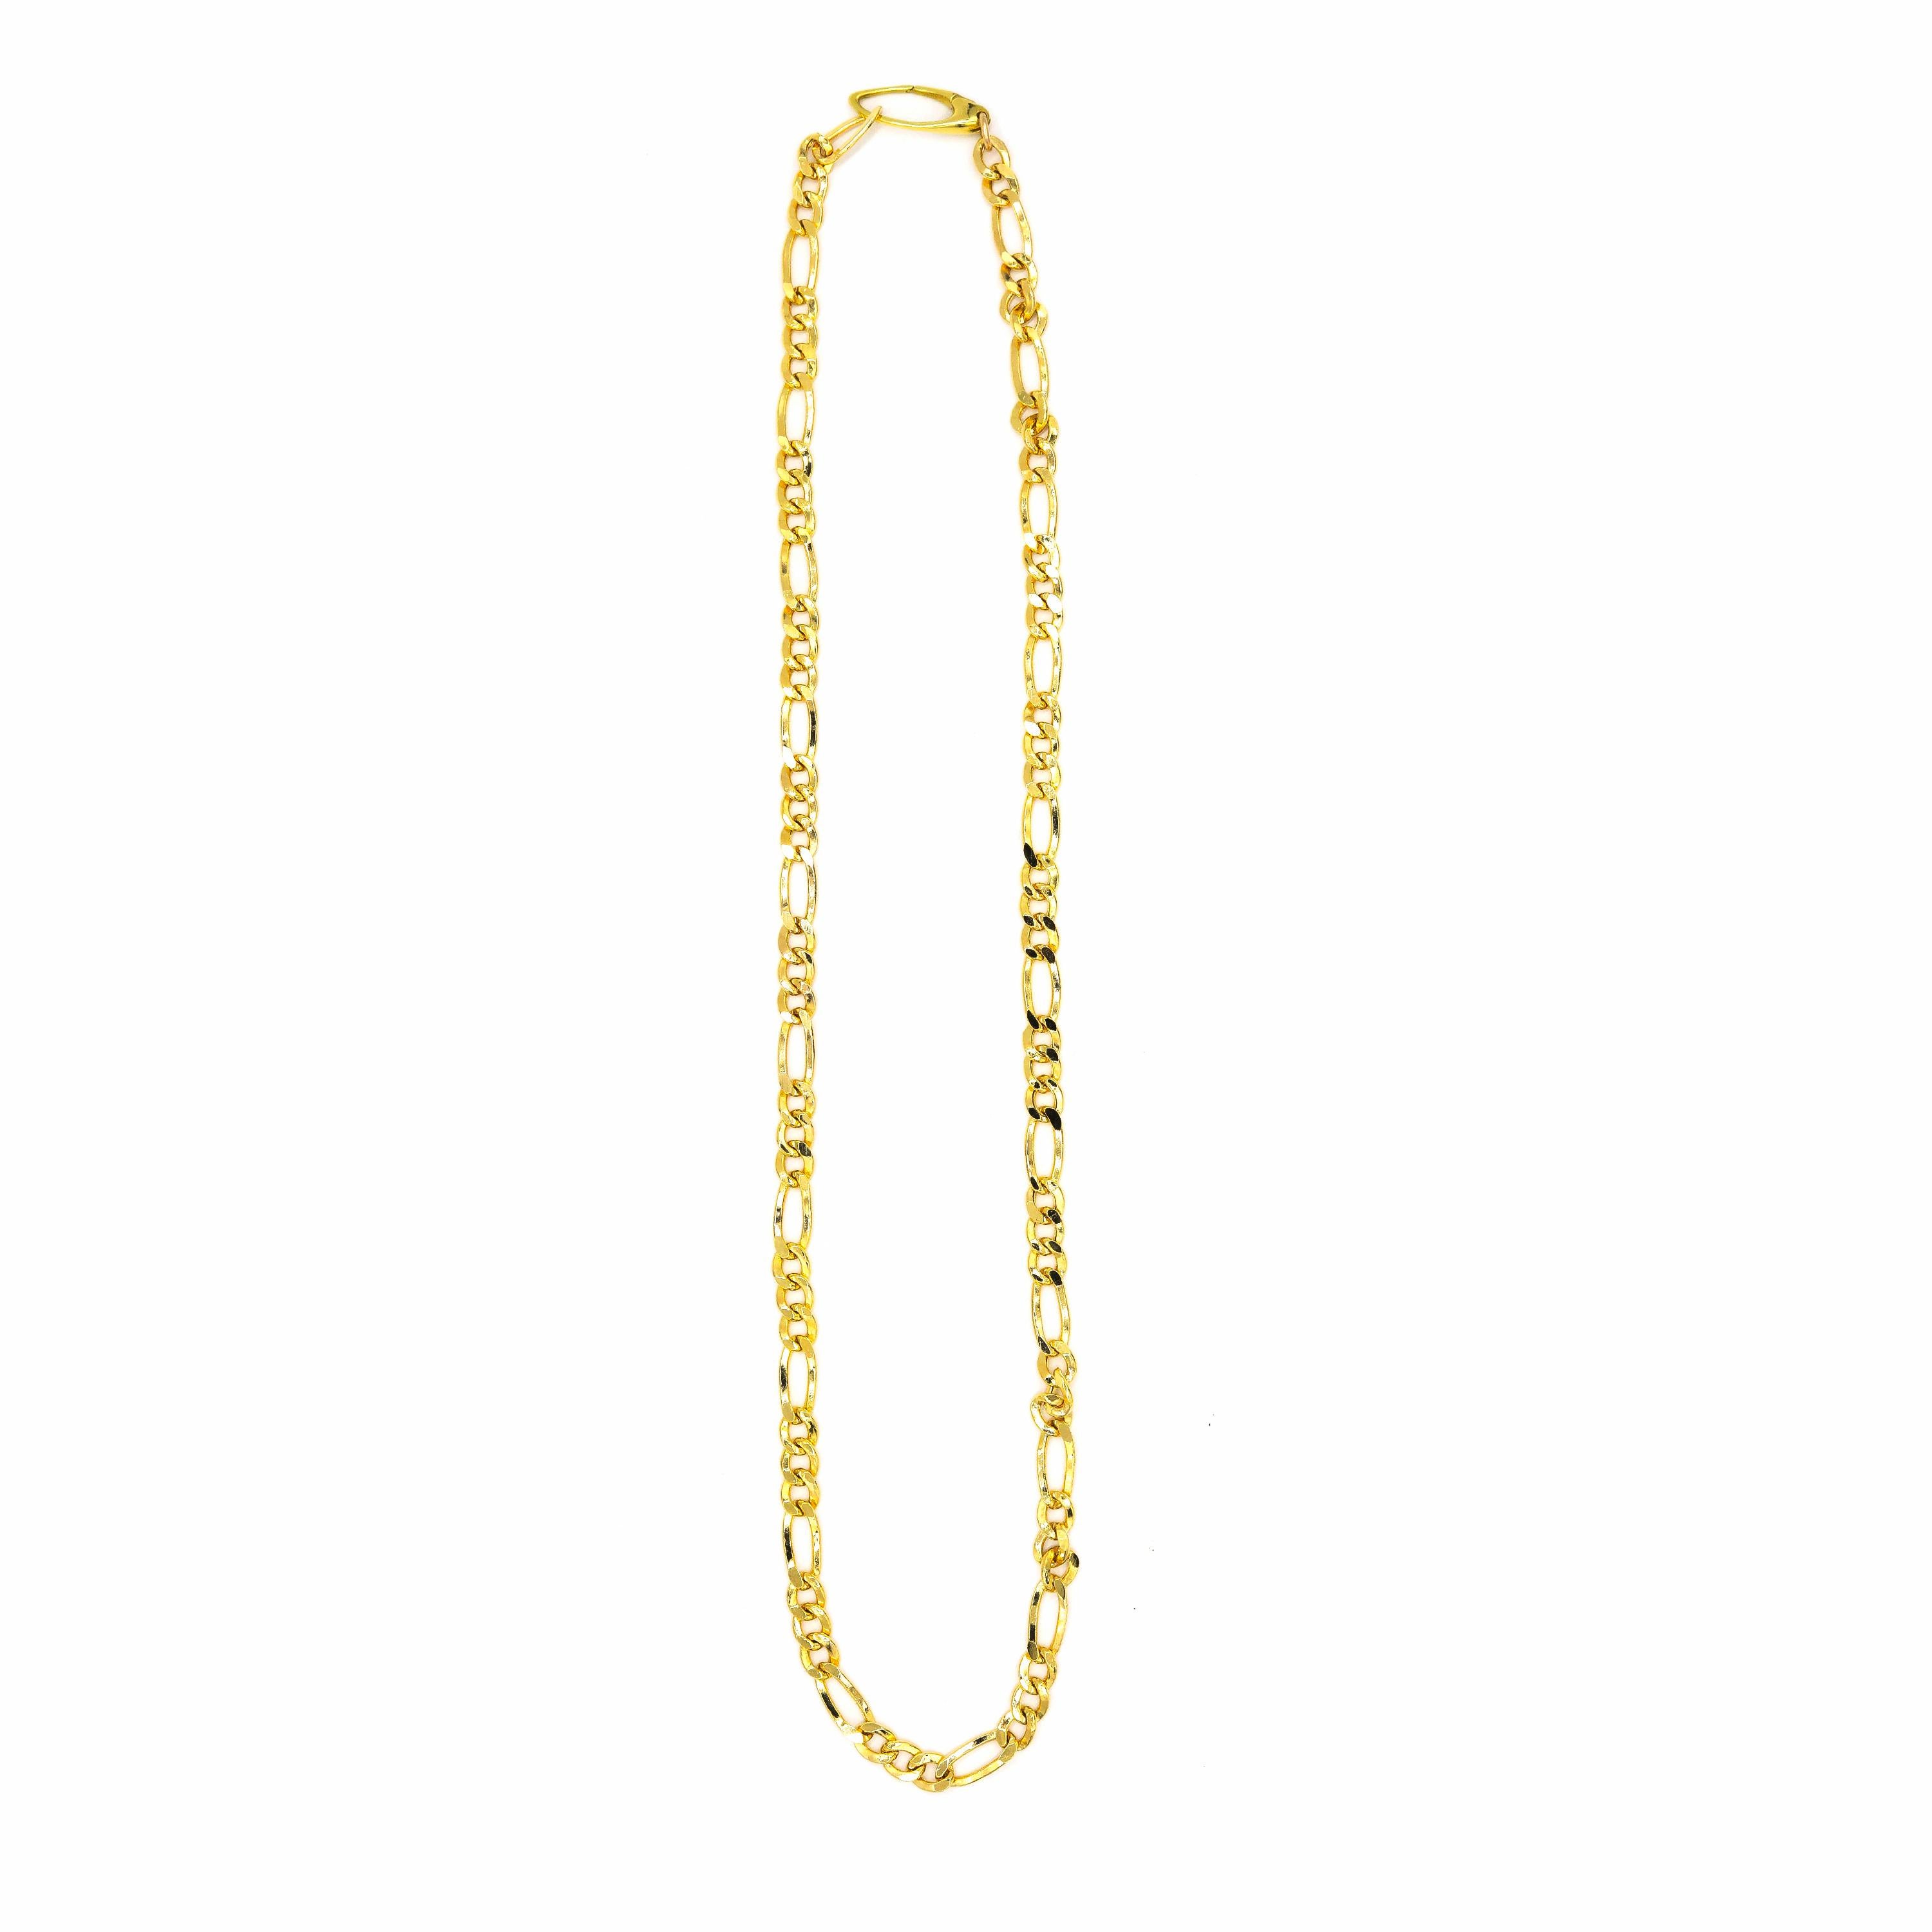 Contemporary 18 Karat Yellow Gold Link Chain Necklace Estate Jewelry